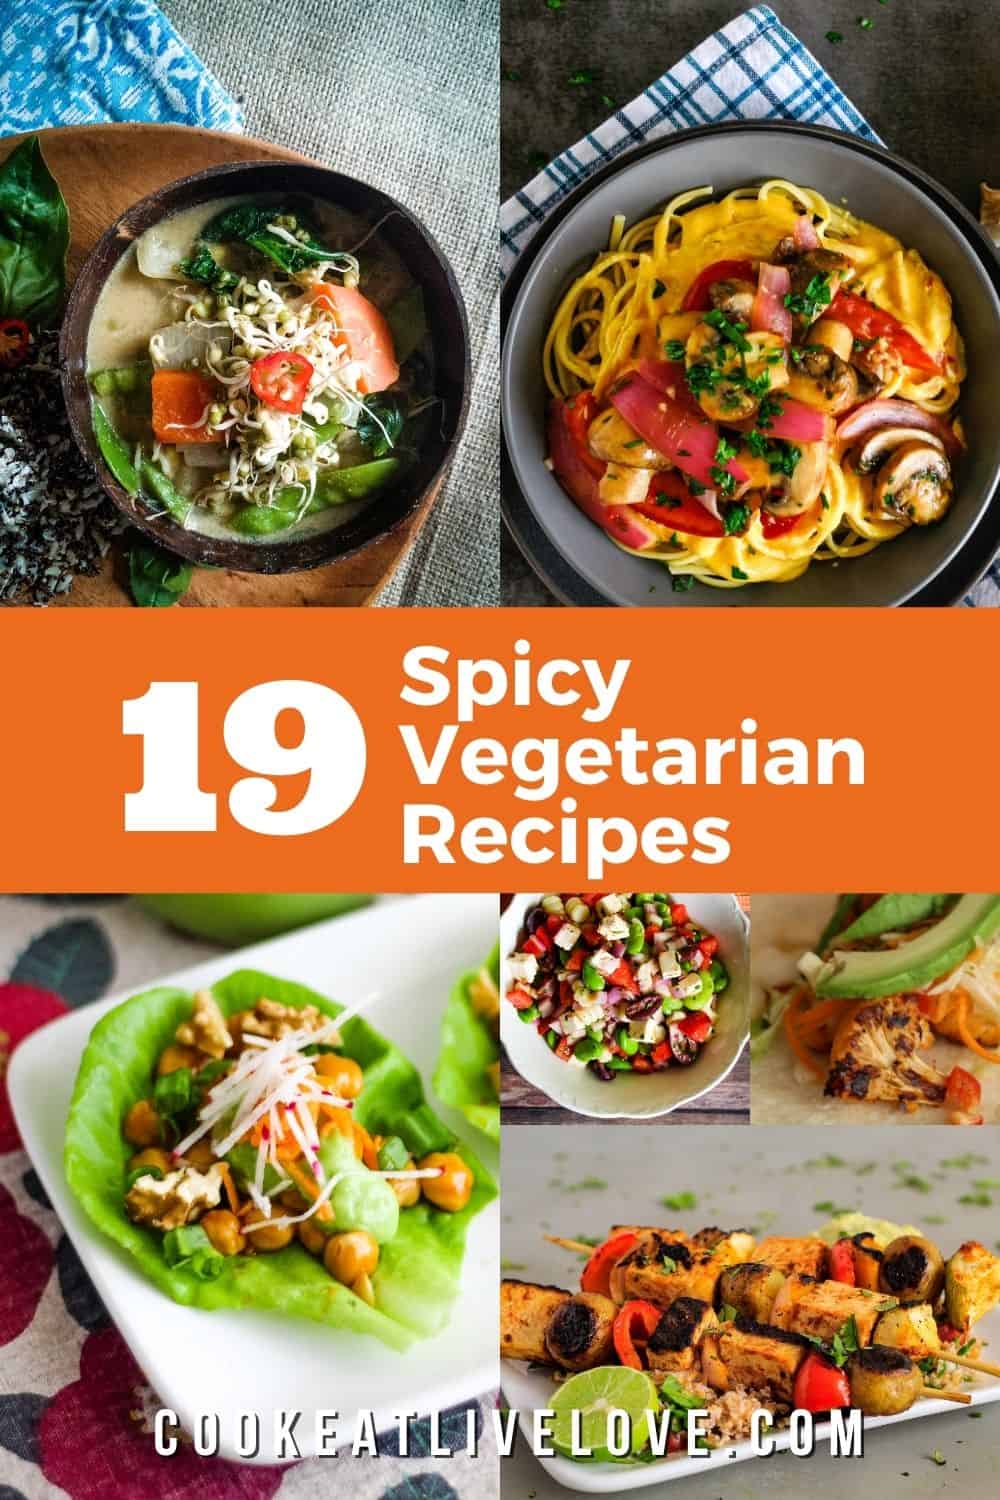 Serving Up The Best Spicy Vegetarian Recipes ~ Cook Eat Live Love